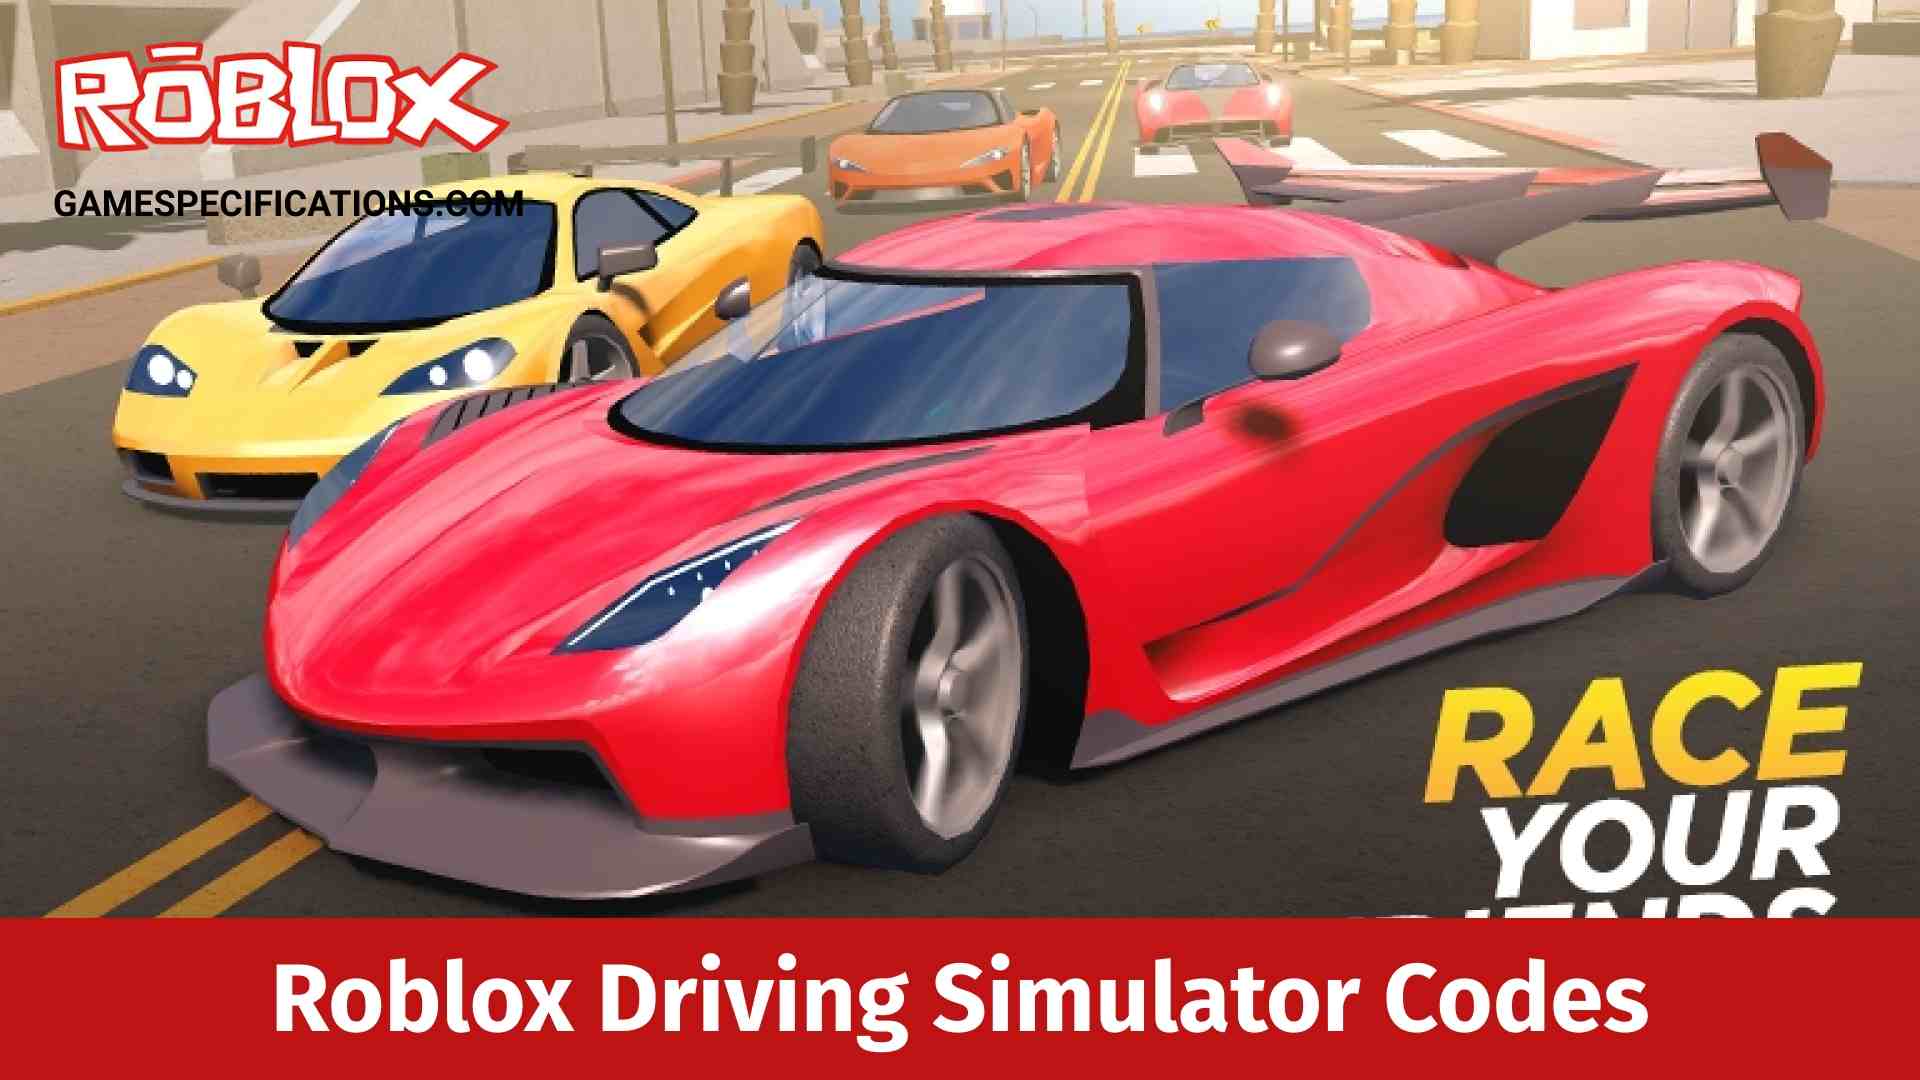 Roblox Driving Simulator Codes July 2021 Game Specifications - all car games on roblox